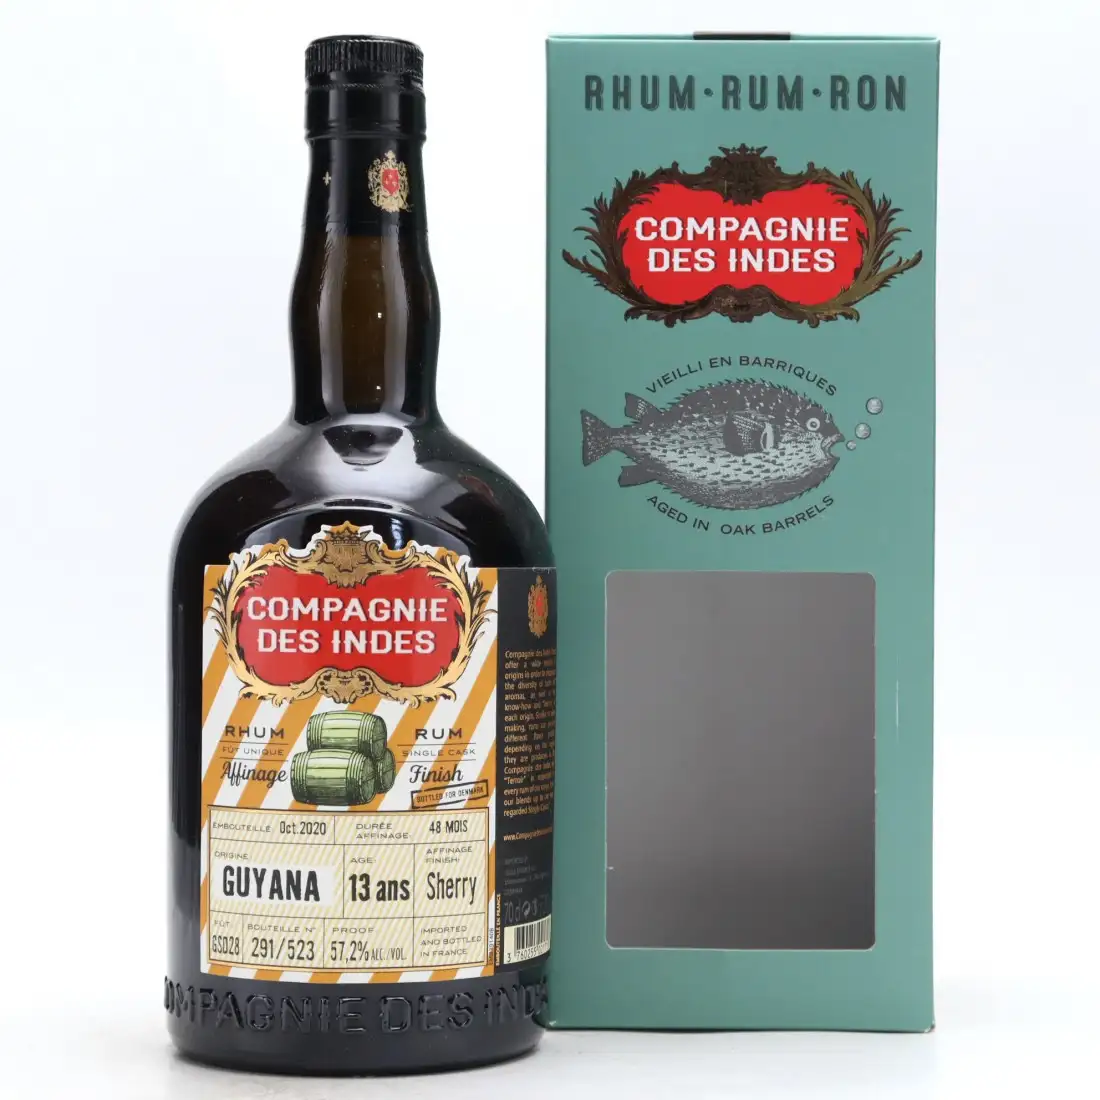 Image of the front of the bottle of the rum Guyana Sherry Cask